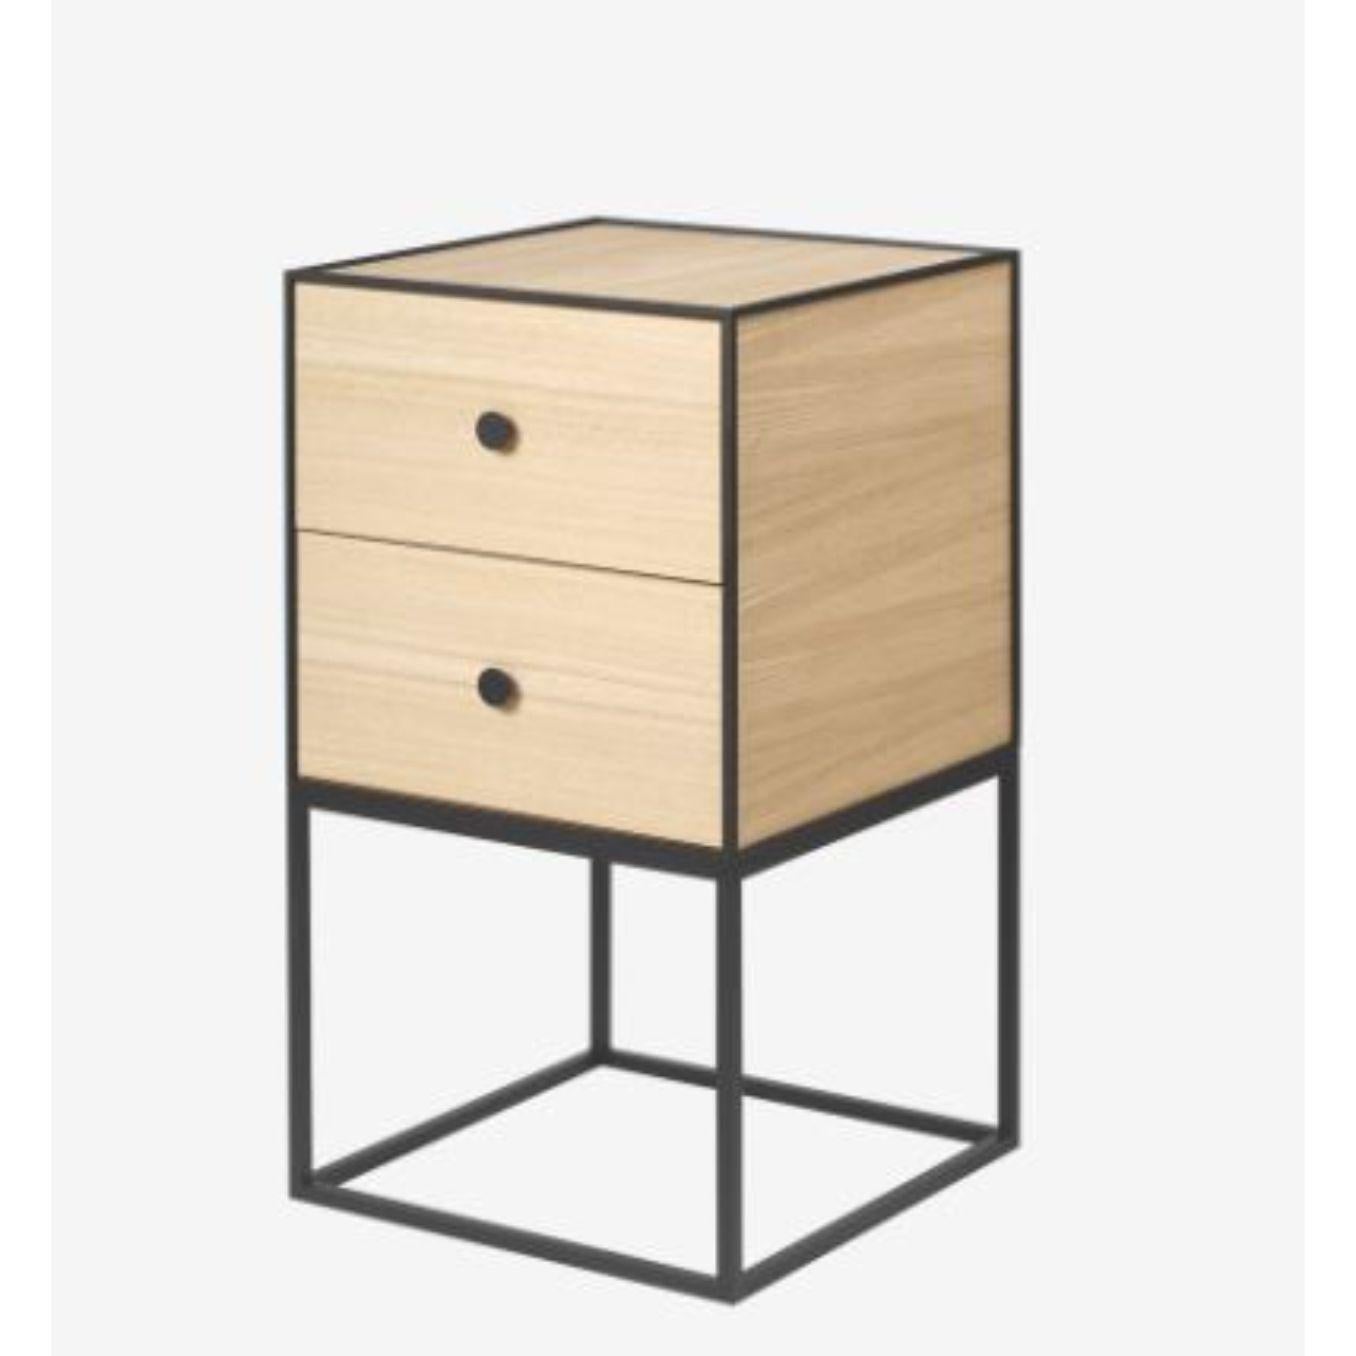 35 oak frame sideboard with 2 drawers by Lassen
Dimensions: D 35 x W 35 x H 63 cm 
Materials: Finér, melamin, melamine, metal, veneer, oak
Also available in different colours and dimensions.
Weight: 15.50 kg

By Lassen is a Danish design brand